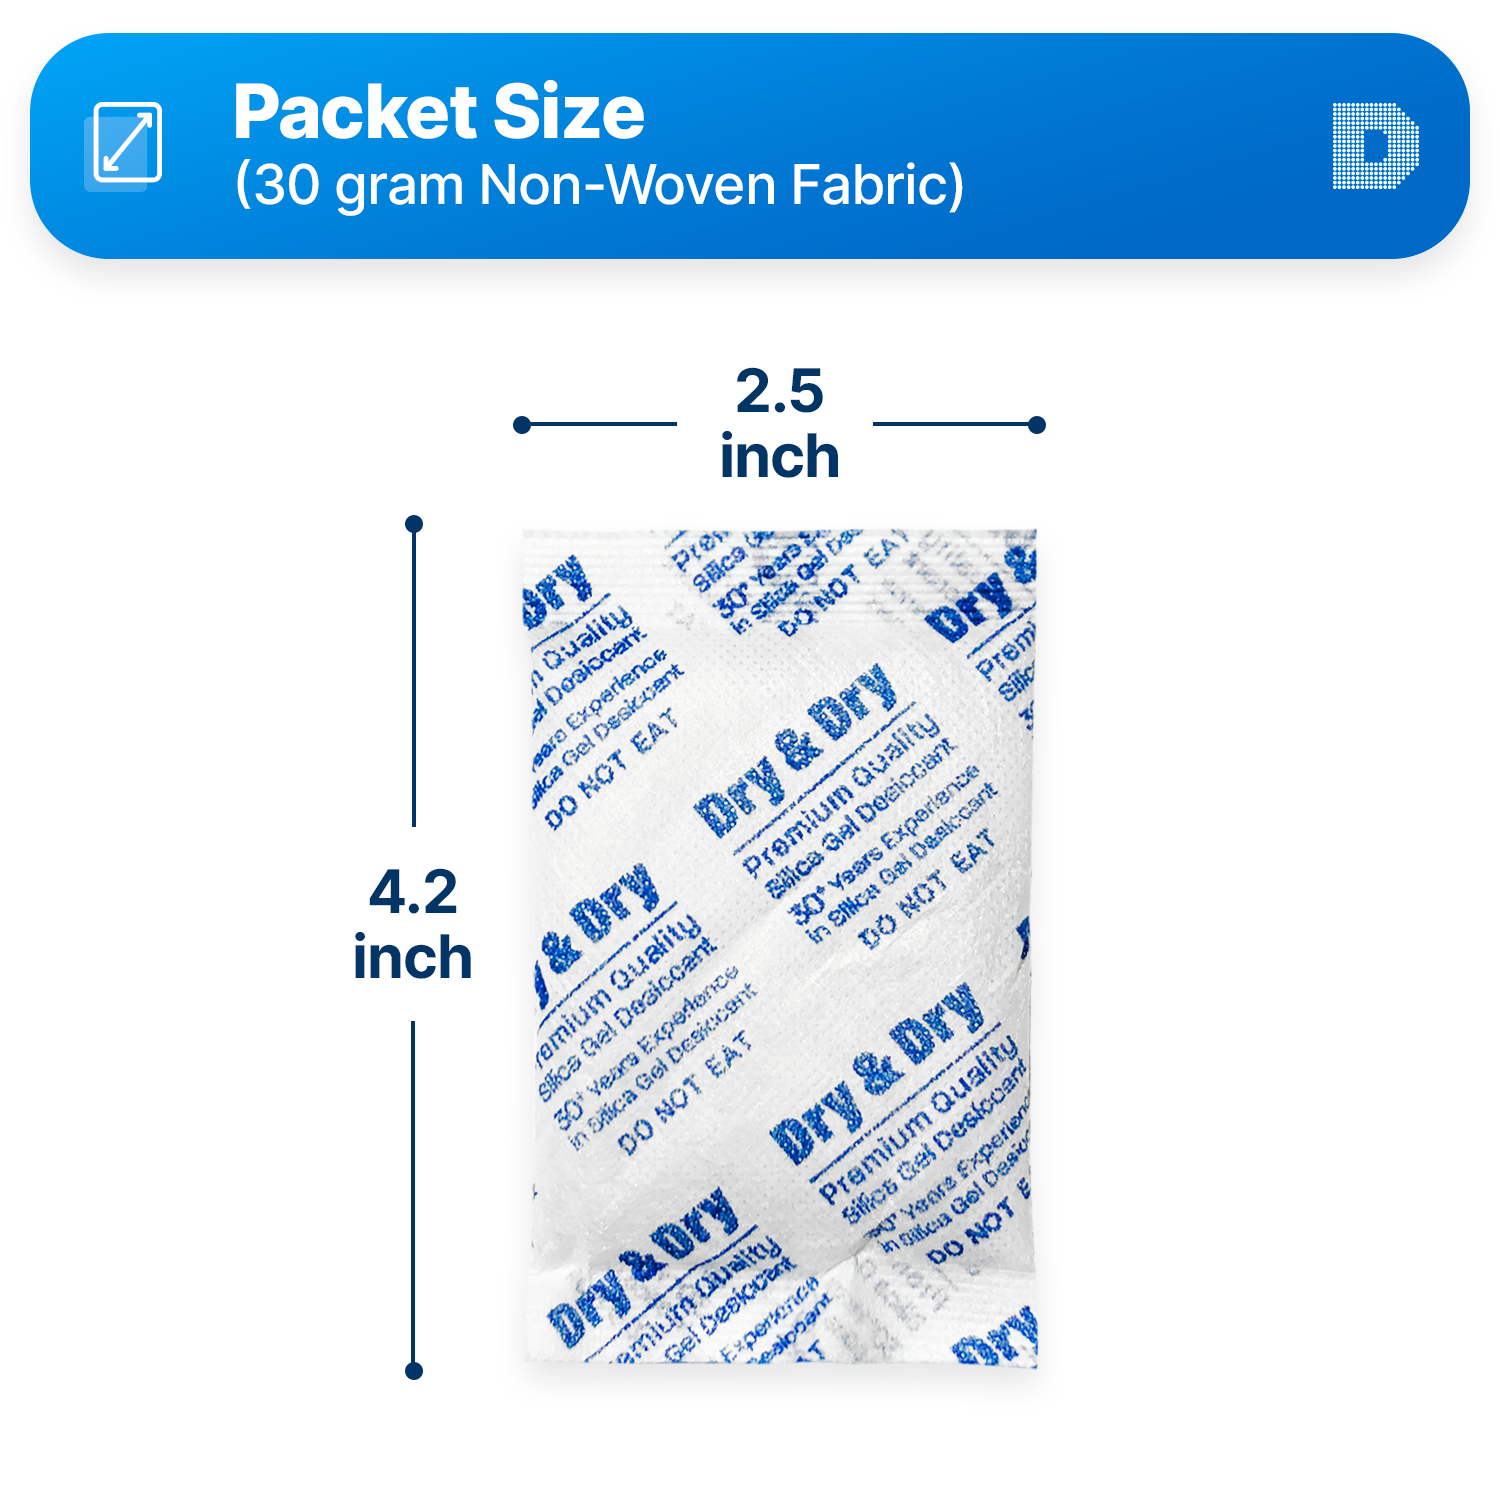 30 gram [600 Packets] "Dry & Dry" Premium Silica Gel Desiccant Packets - Rechargeable Non-Woven Fabric (Cloth)